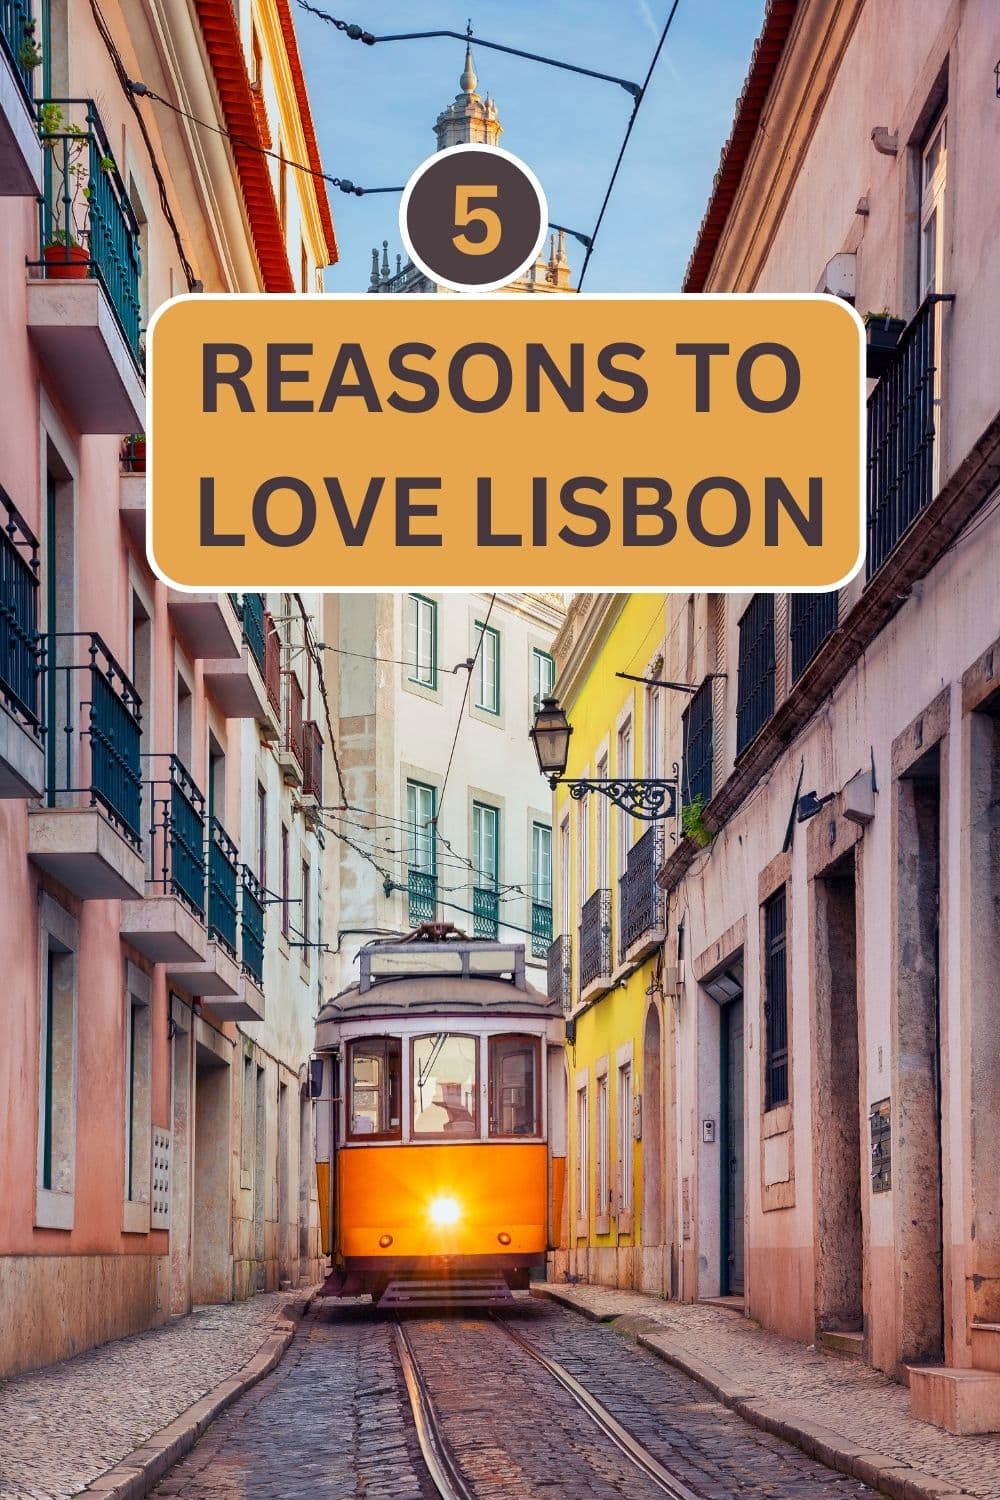 Lisbon is a popular top destination in Portugal but there are still some off-the-radar things to do. Here's a list of 5 Lisbon must-see items. #lisbon #portugal